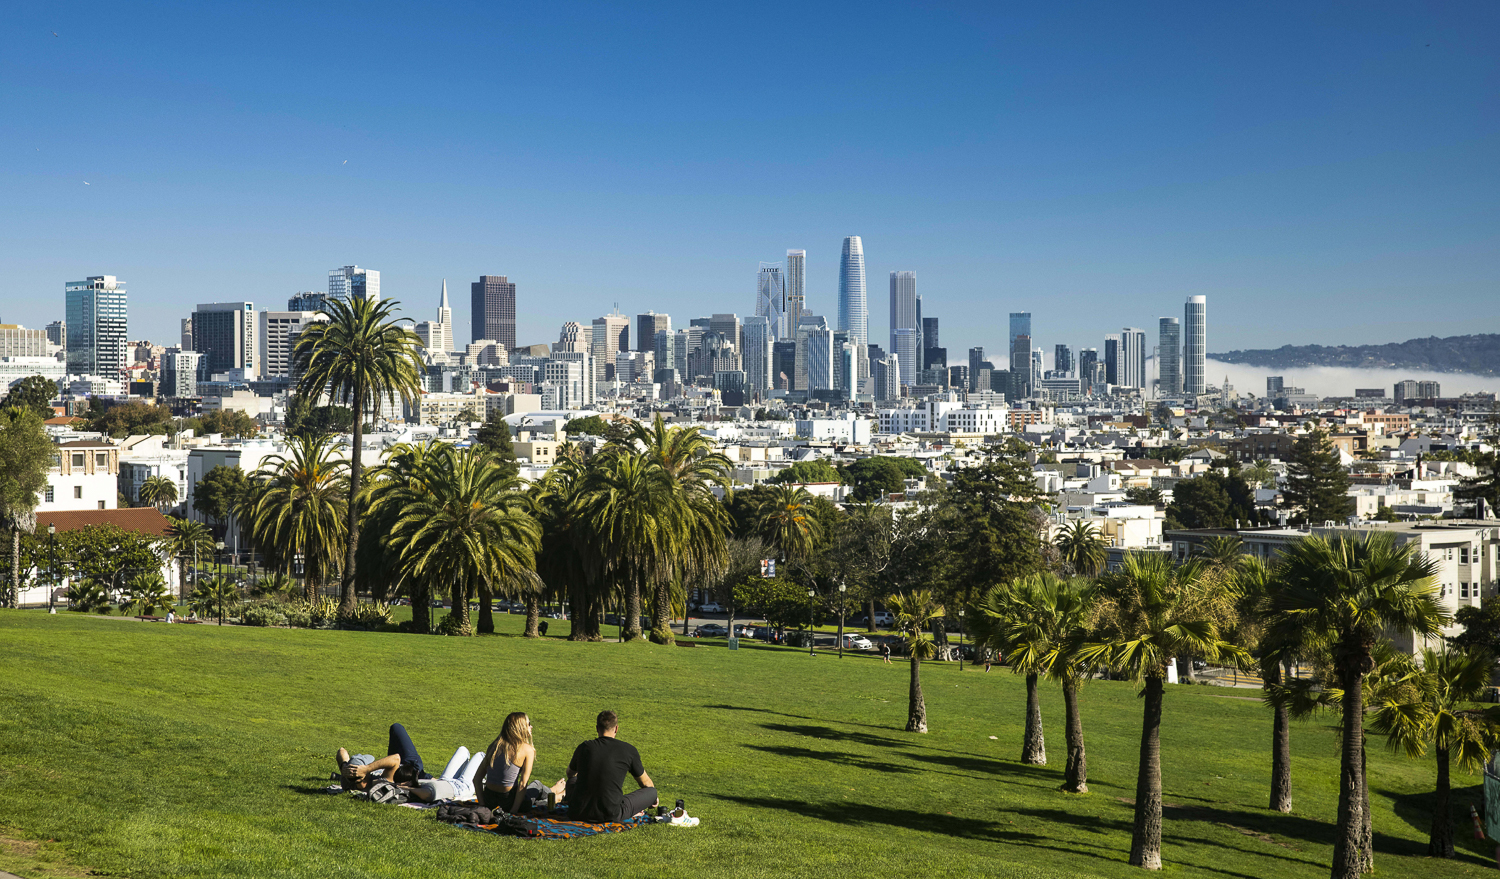 New renderings for 50 Main Street from Dolores Park, rendering by Foster + Partners courtesy Hines